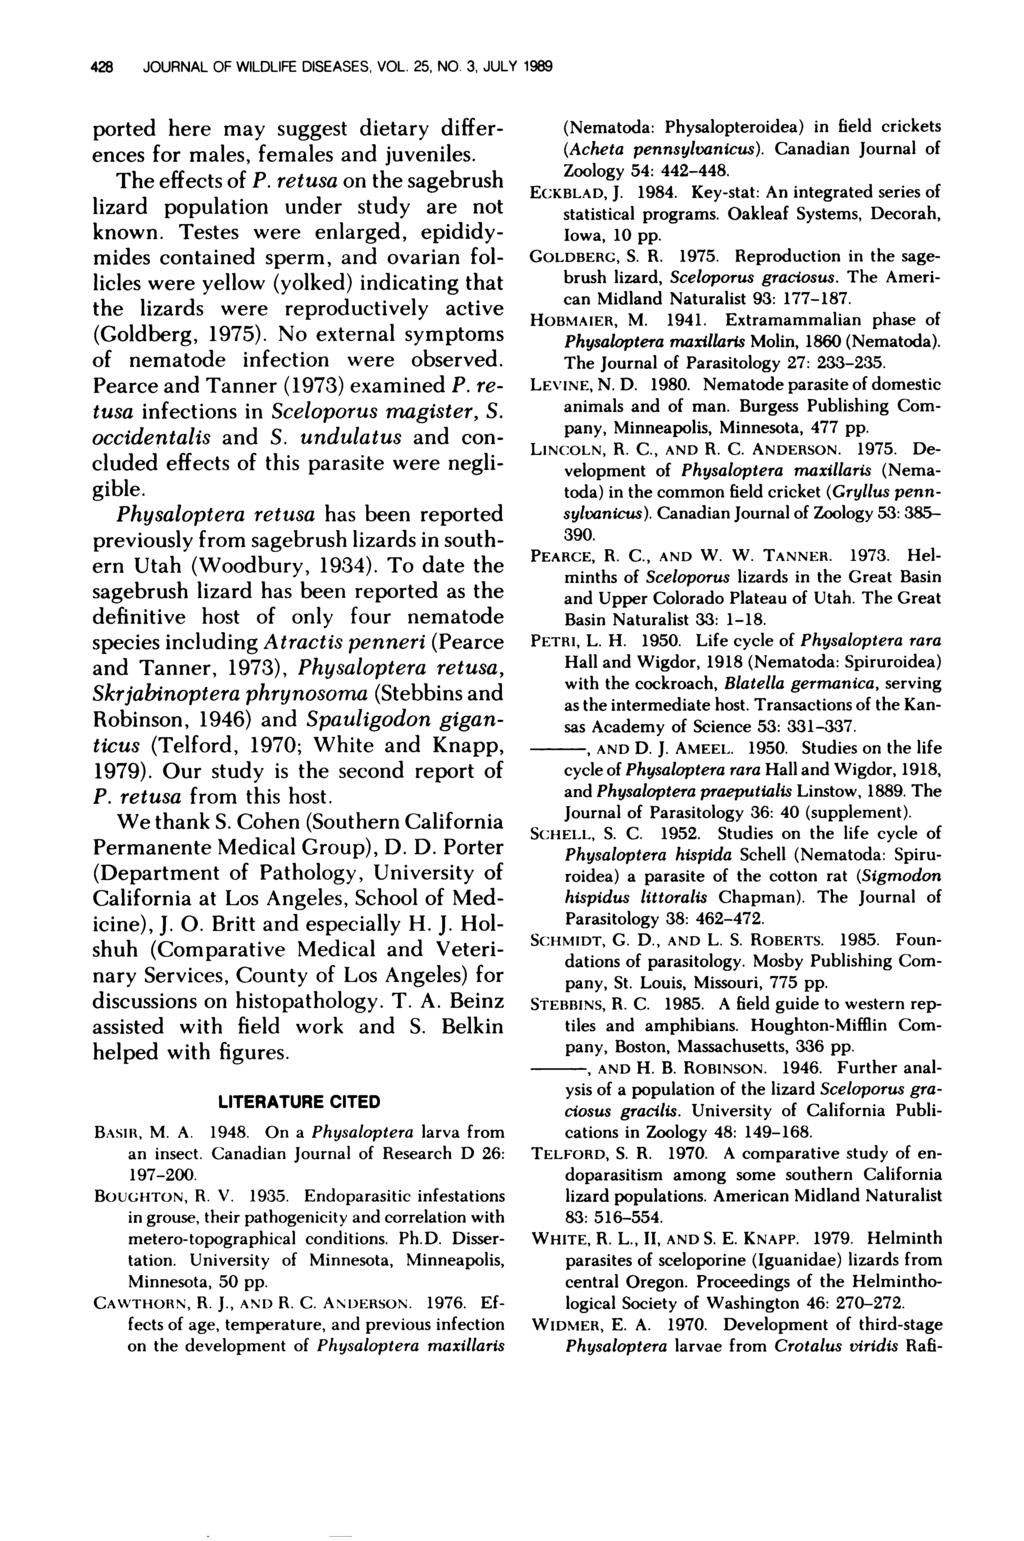 428 JOURNAL OF WILDLIFE DISEASES. VOL. 25, NO. 3, JULY 1989 ported here may suggest dietary differences for males, females and juveniles. The effects of P.